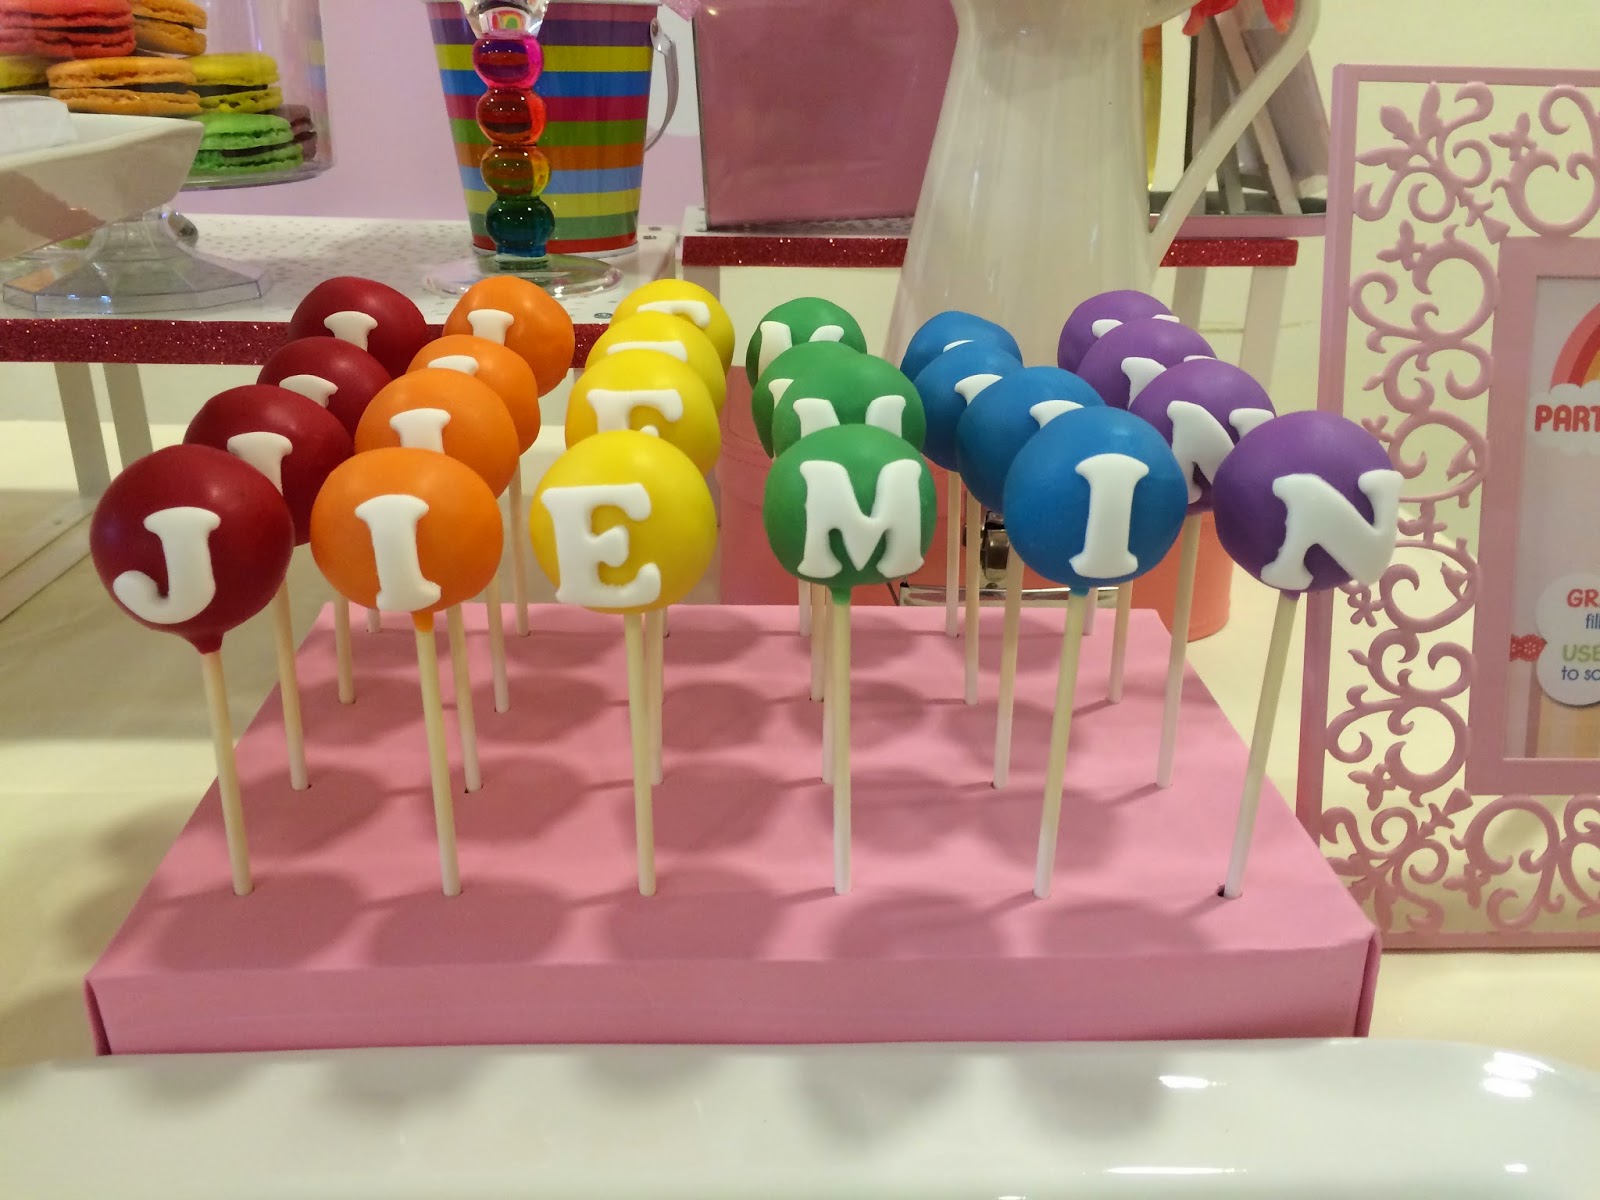 Cake Pop Stand - Display Your Pops